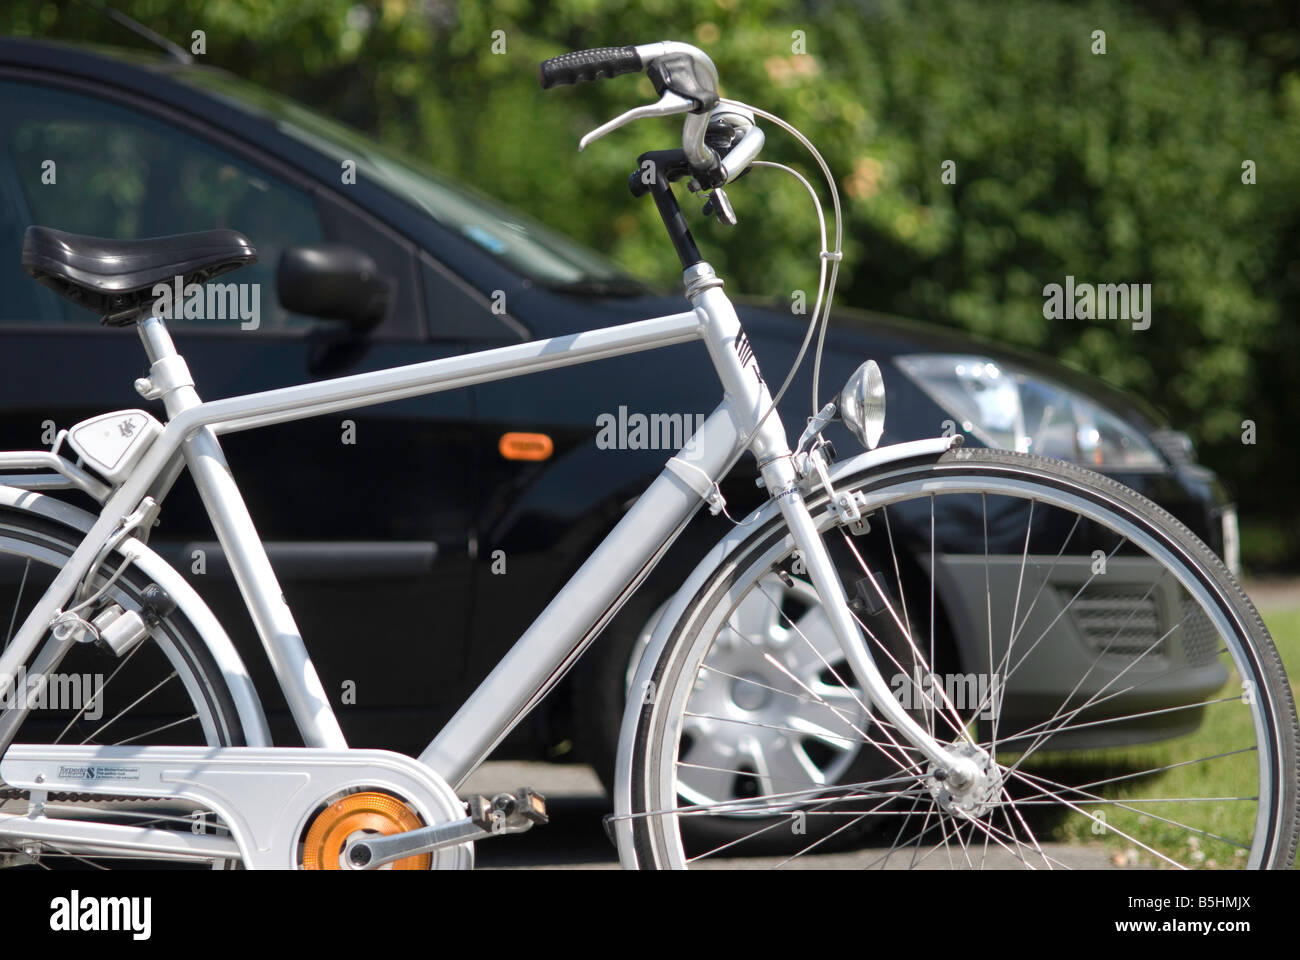 bike in front of a car, going green Stock Photo